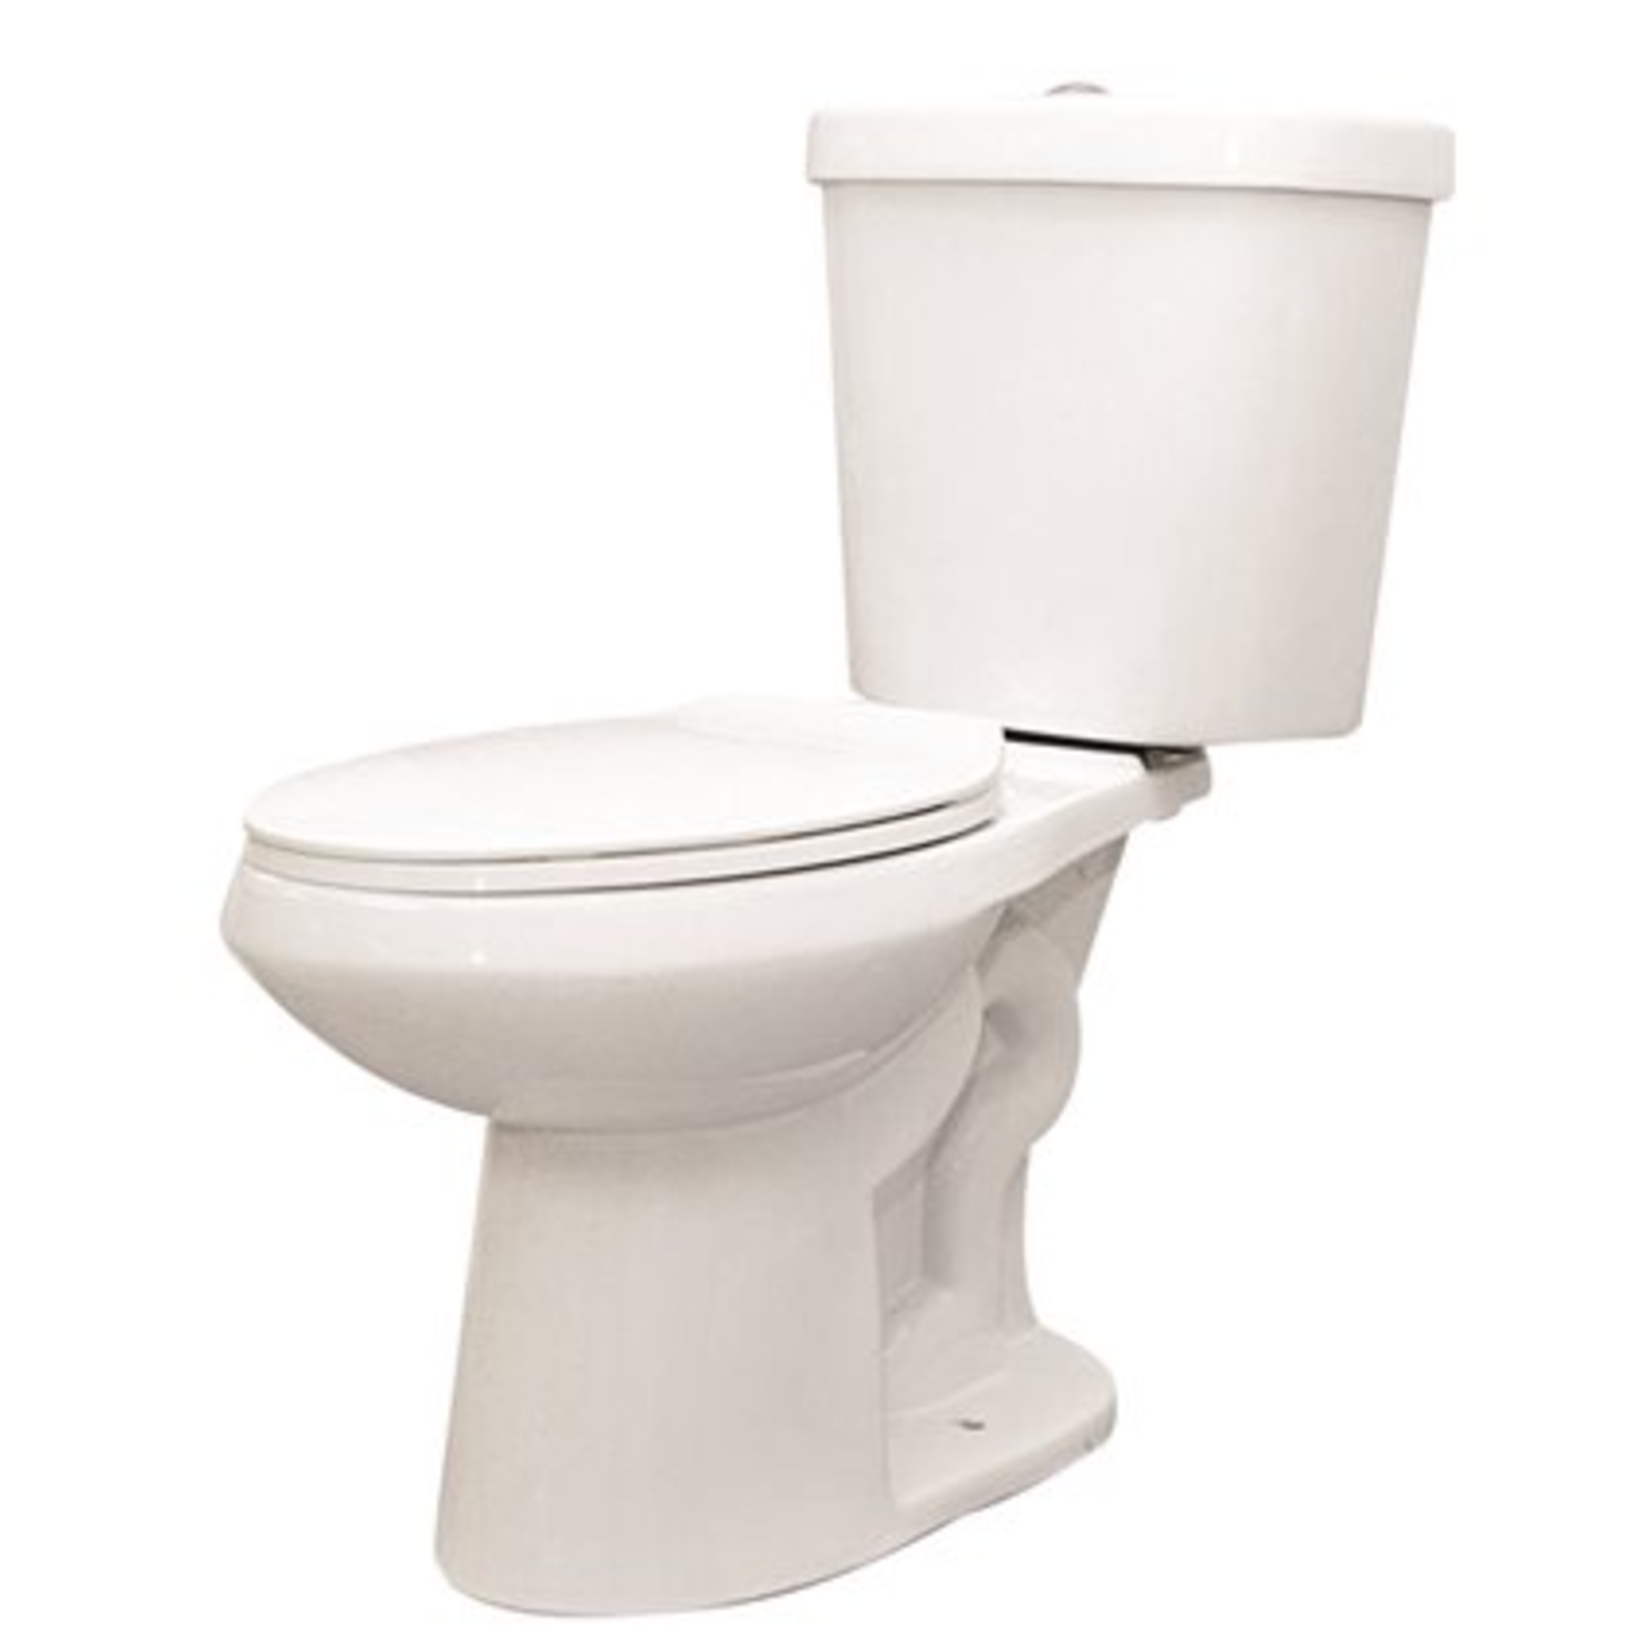 PREMIER PLUS PREMIER SELECT 2-PIECE 1.1/1.6 GPF DUAL FLUSH HIGH EFFICIENCY ELONGATED TOILET IN WHITE, SEAT INCLUDED